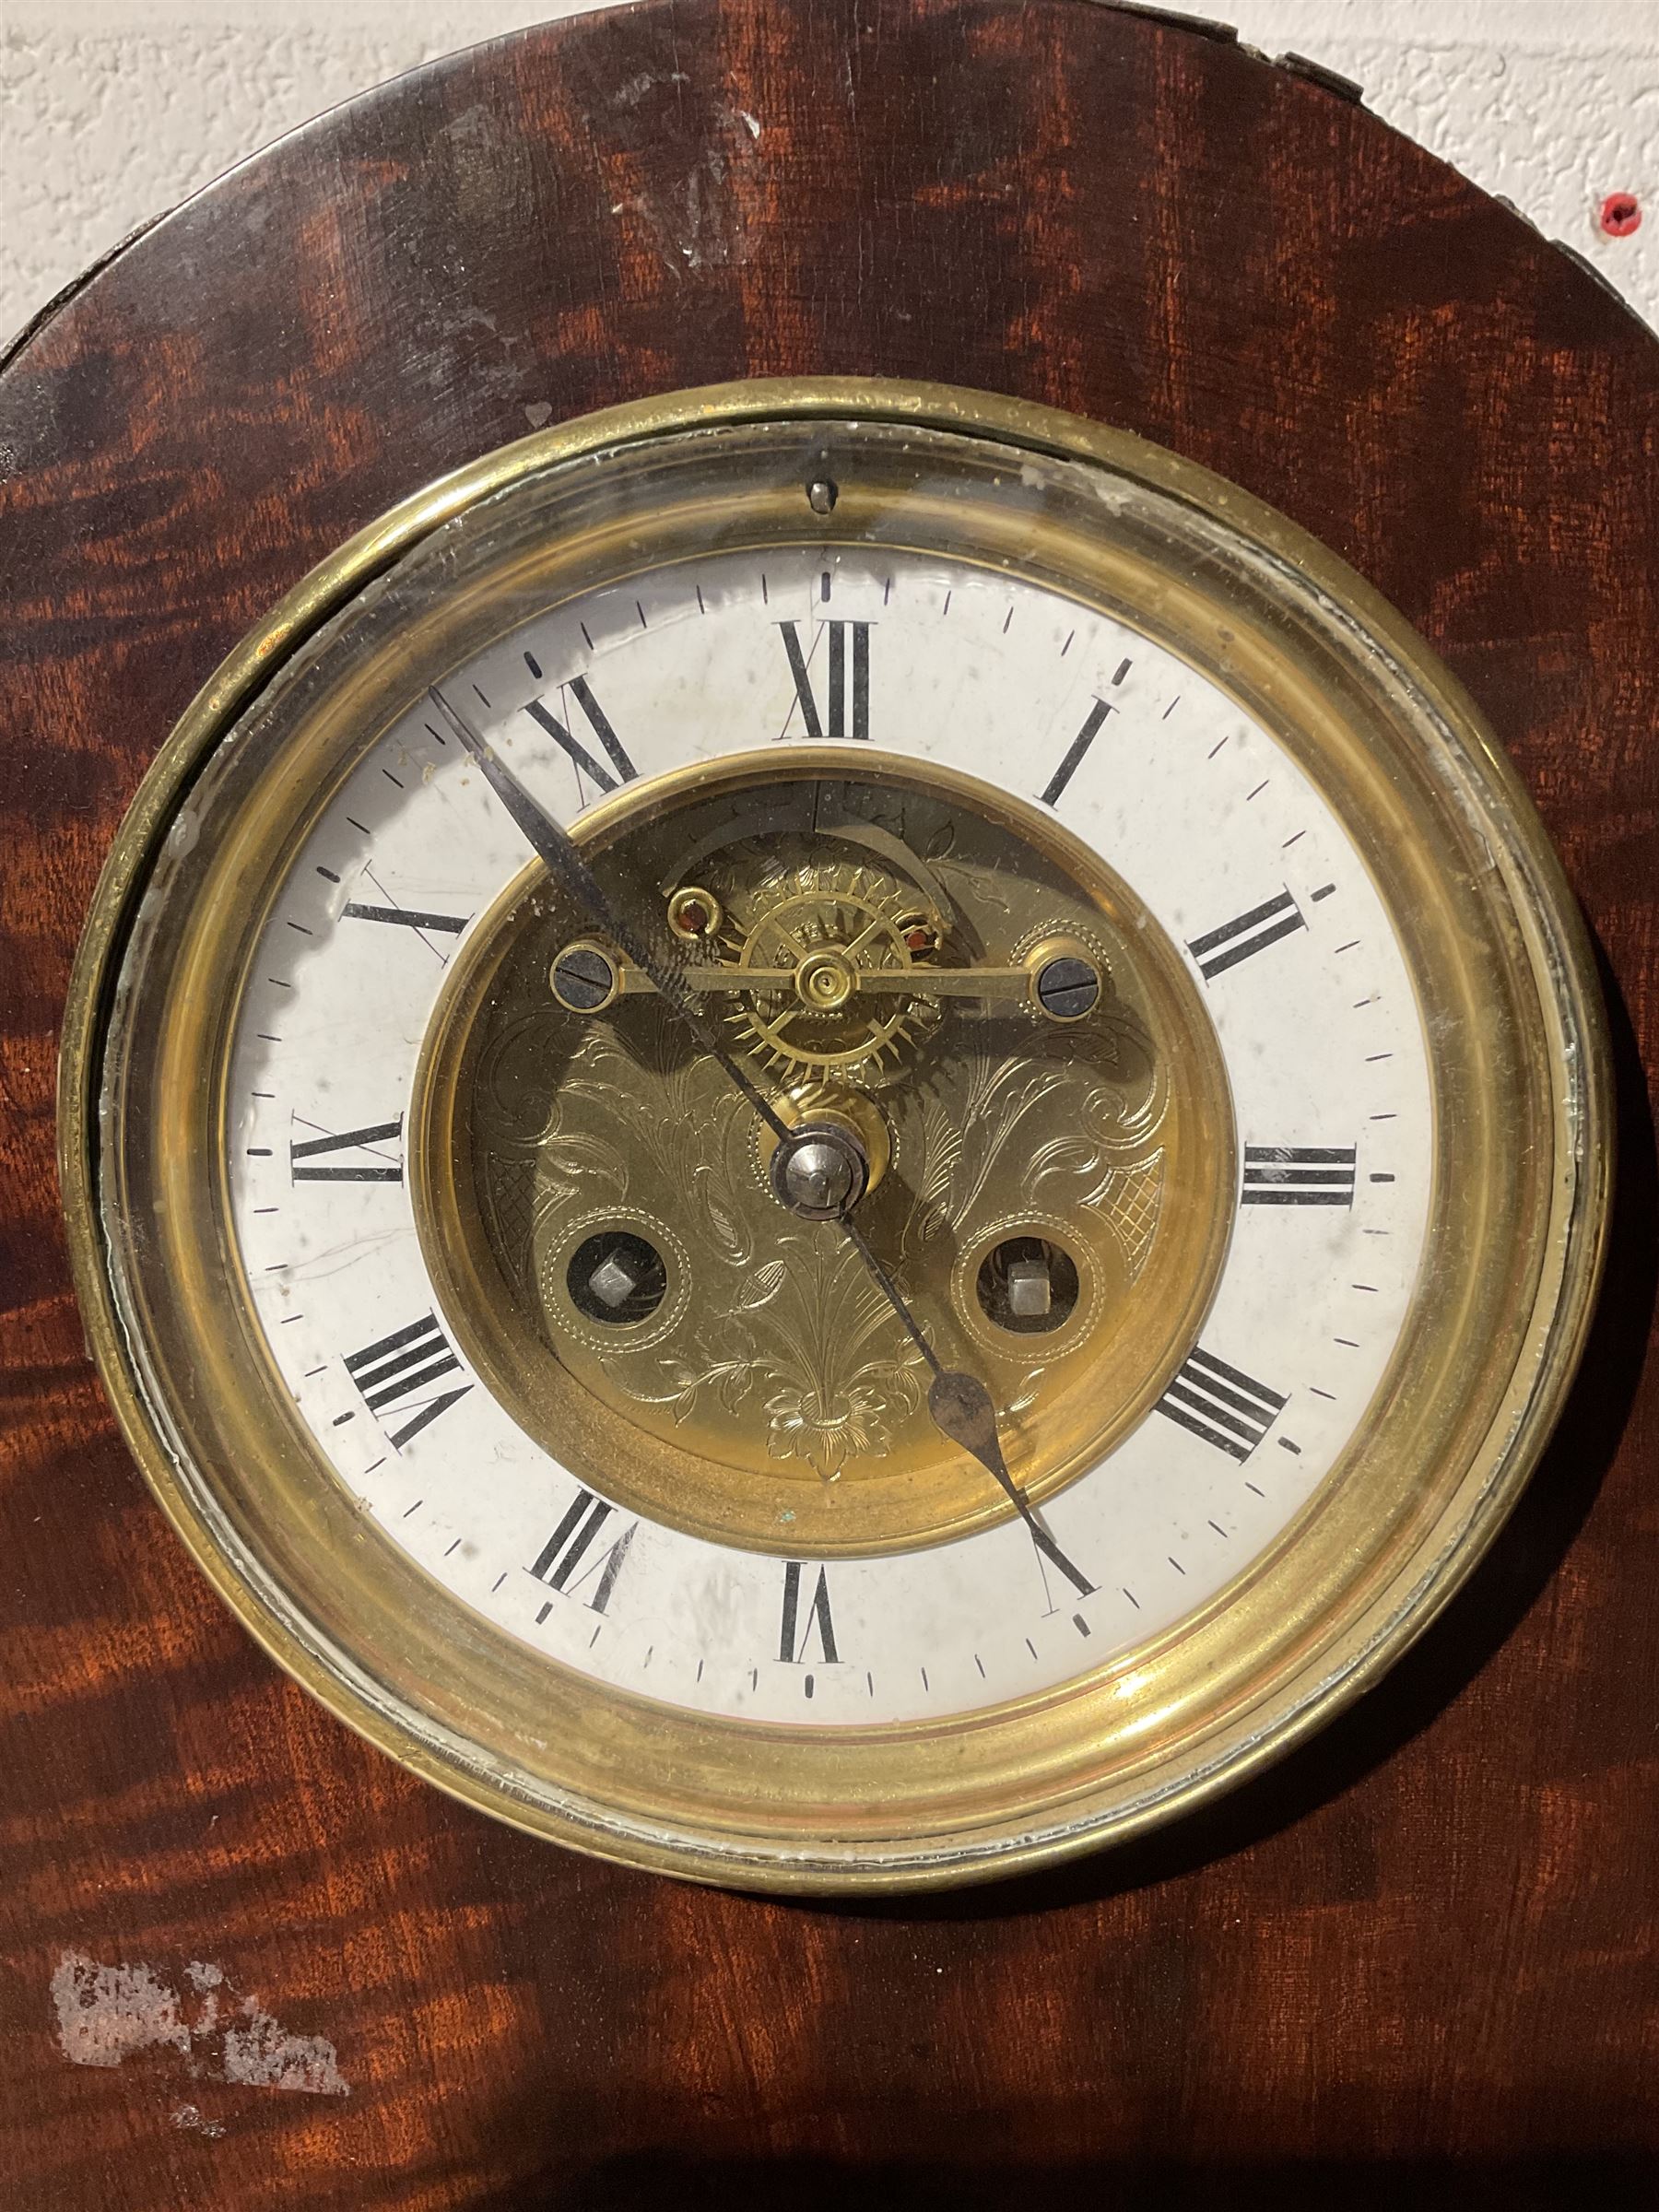 French - 8-day mantle clock in mahogany case circa 1900 - Image 3 of 4